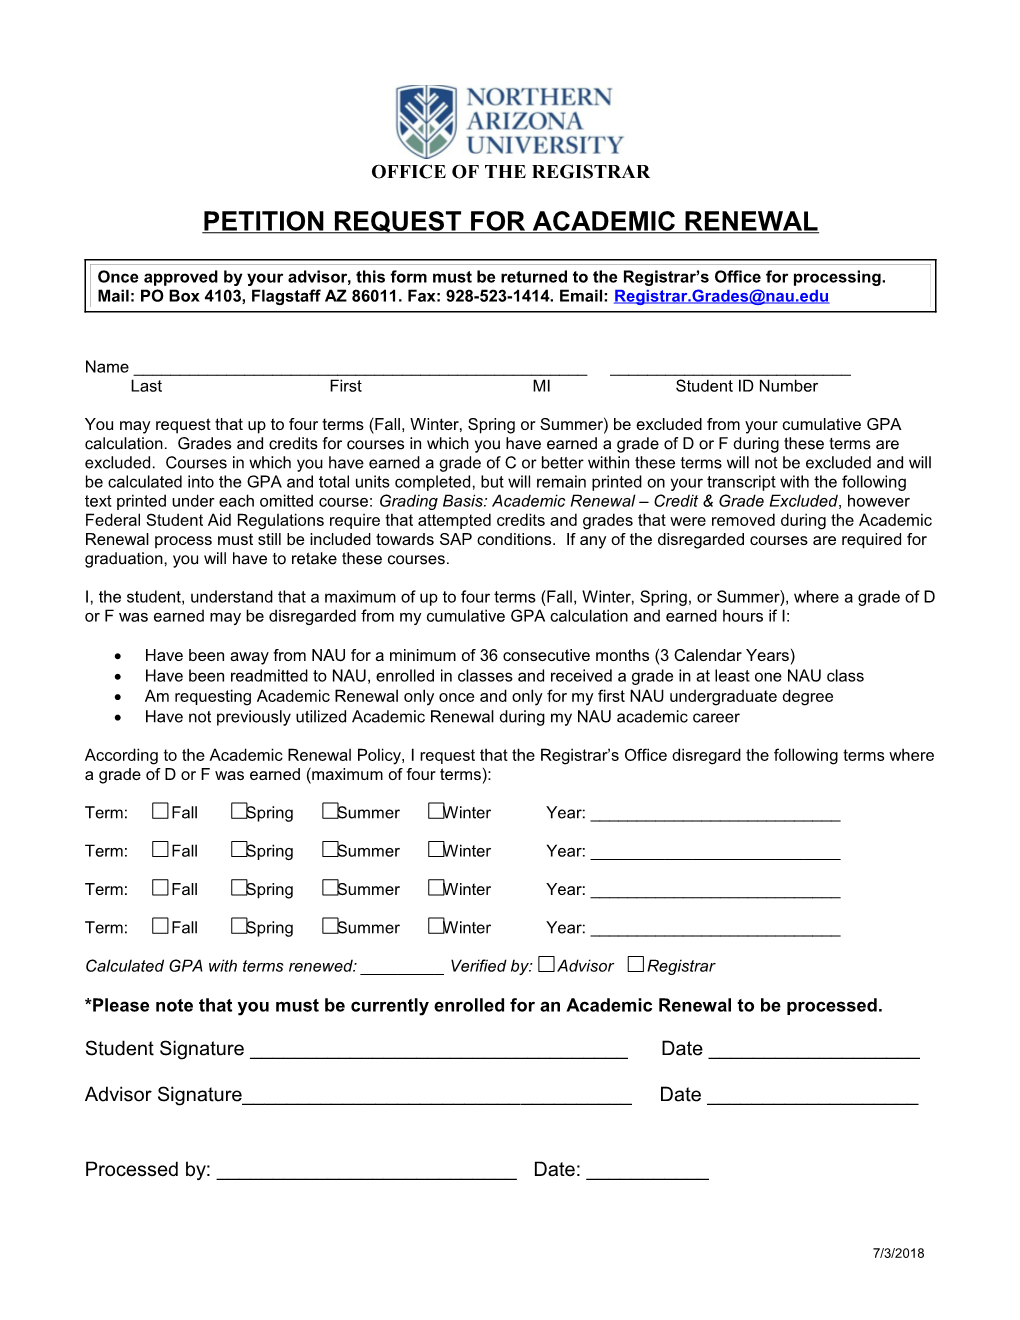 Petition Request for Academic Renewal